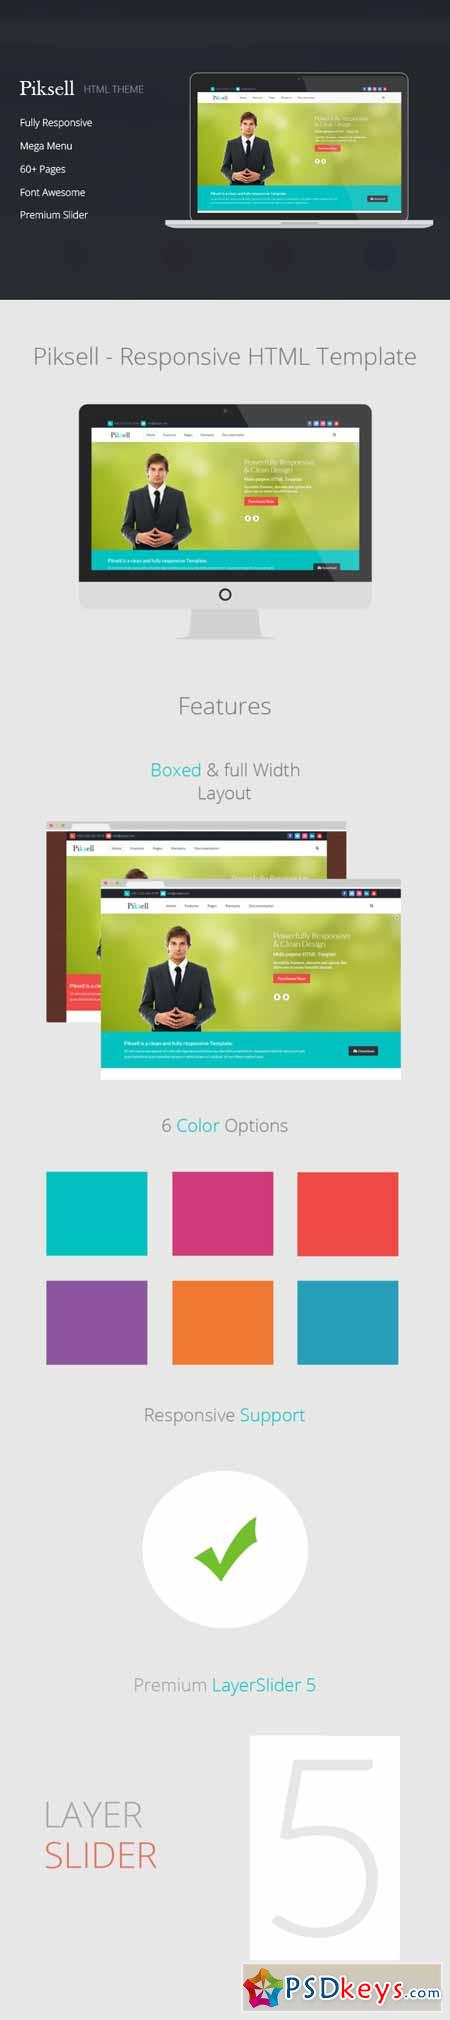 Piksell - Multipurpose html Template 82200